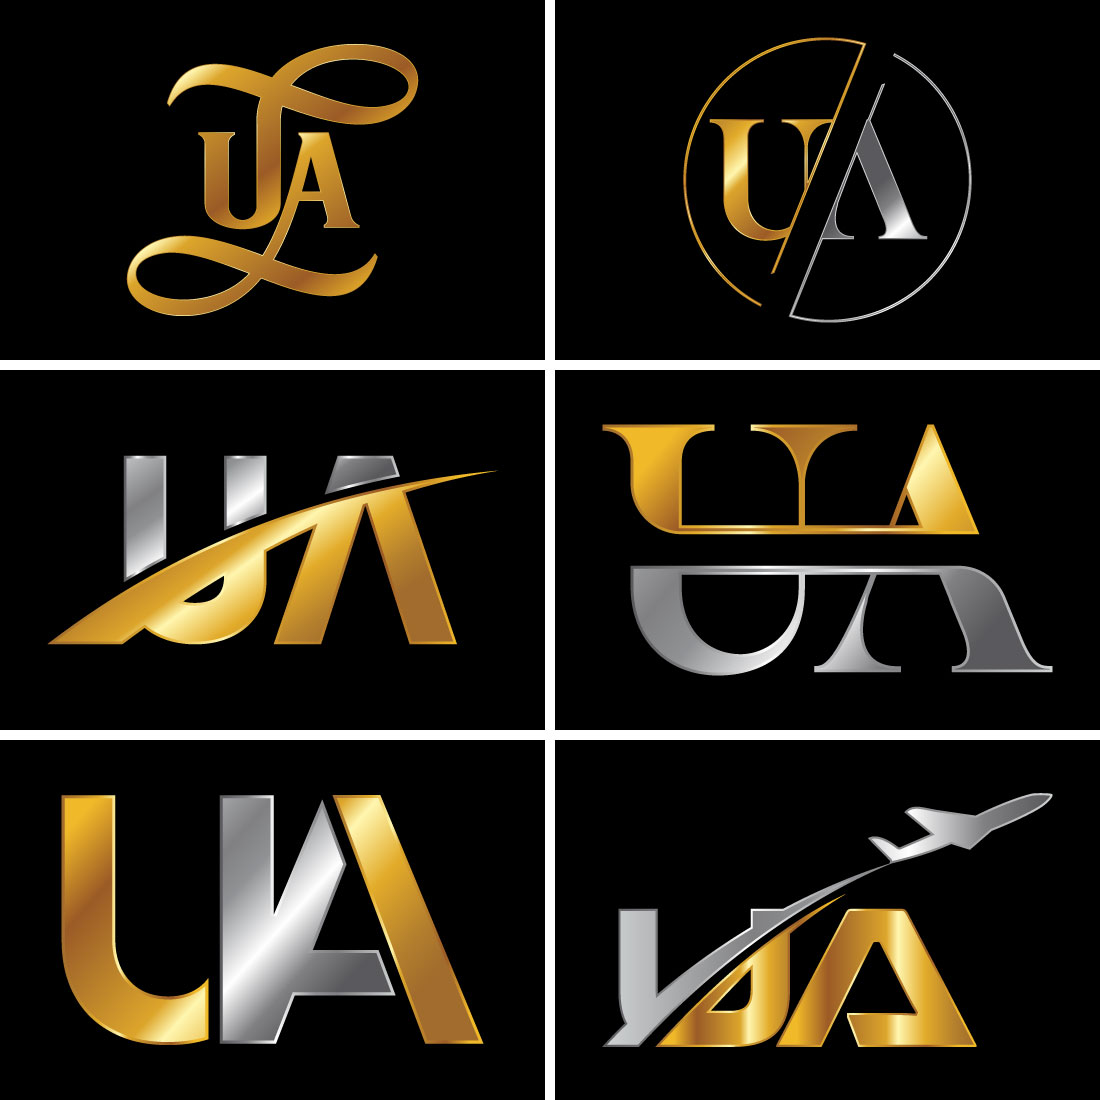 Initial Letter U A Logo Design Vector Template Graphic Alphabet Symbol For Corporate Business Identity cover image.